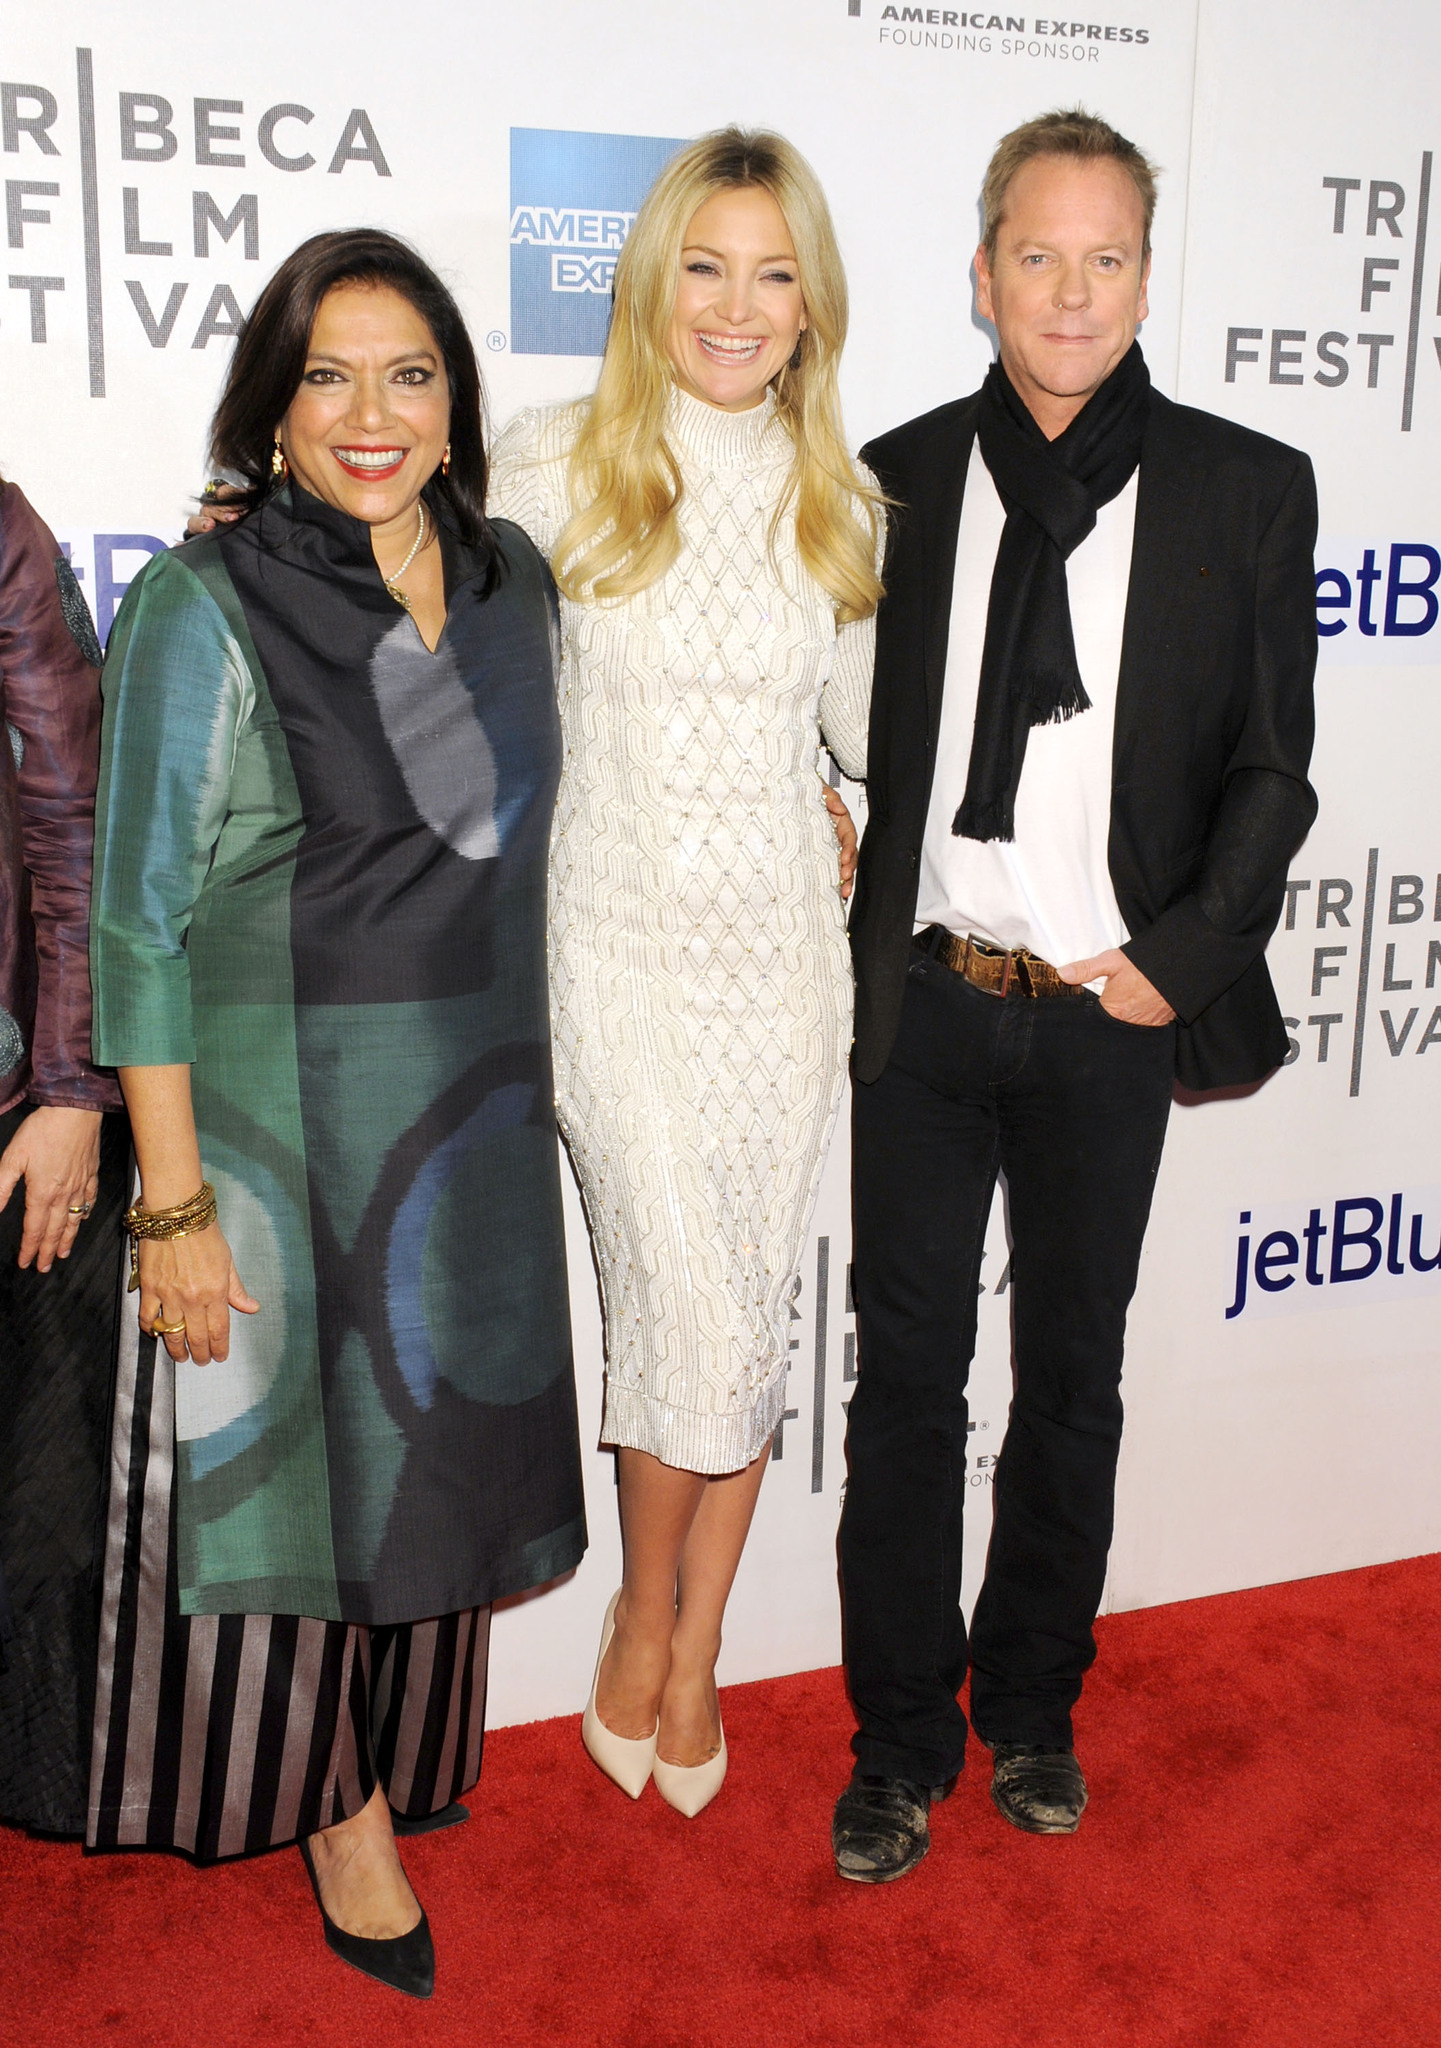 Kiefer Sutherland, Kate Hudson and Mira Nair at event of The Reluctant Fundamentalist (2012)